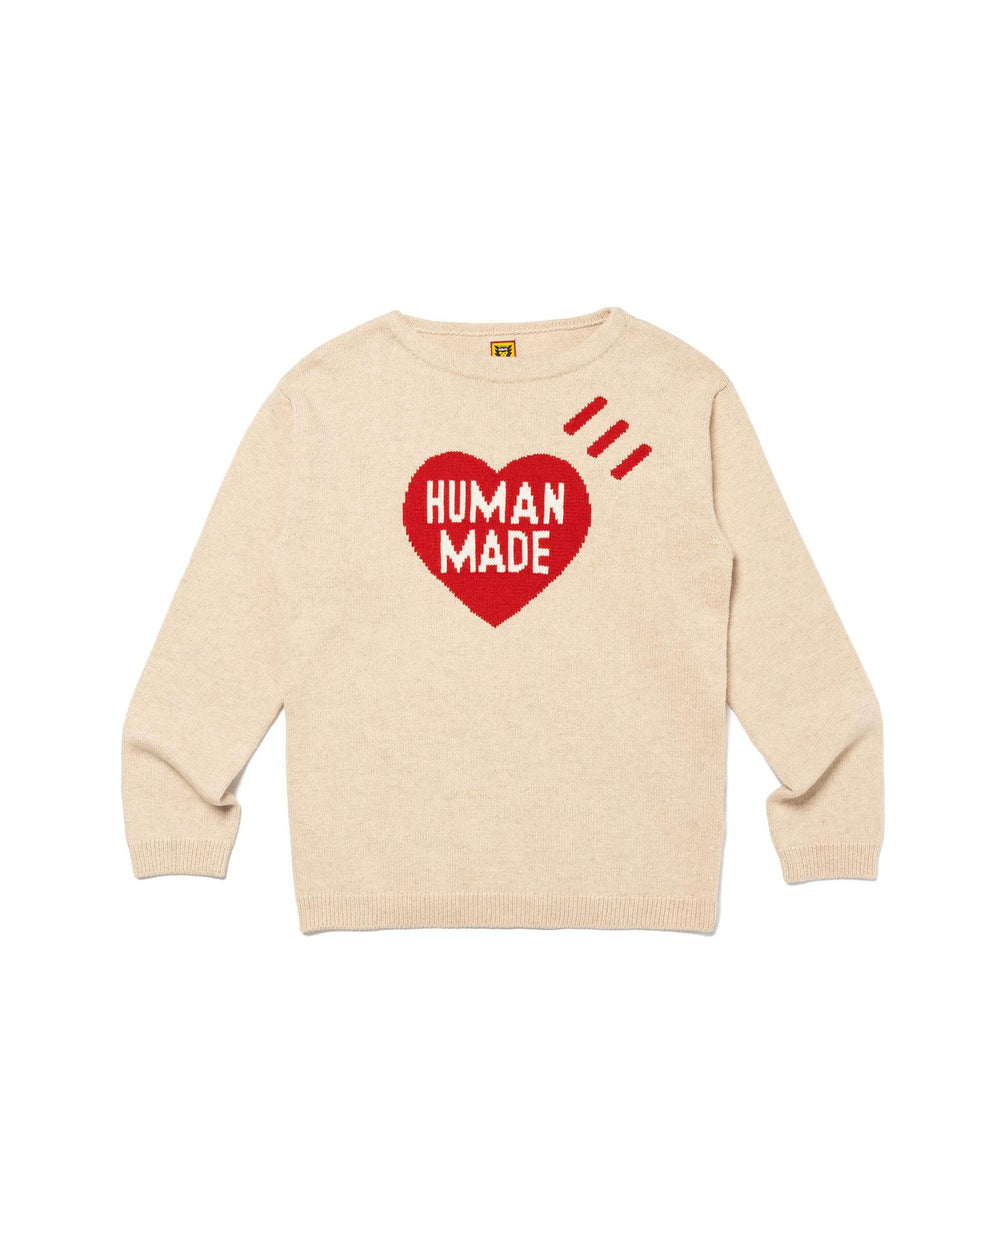 Human Made Heart Knit Sweater | STASHED